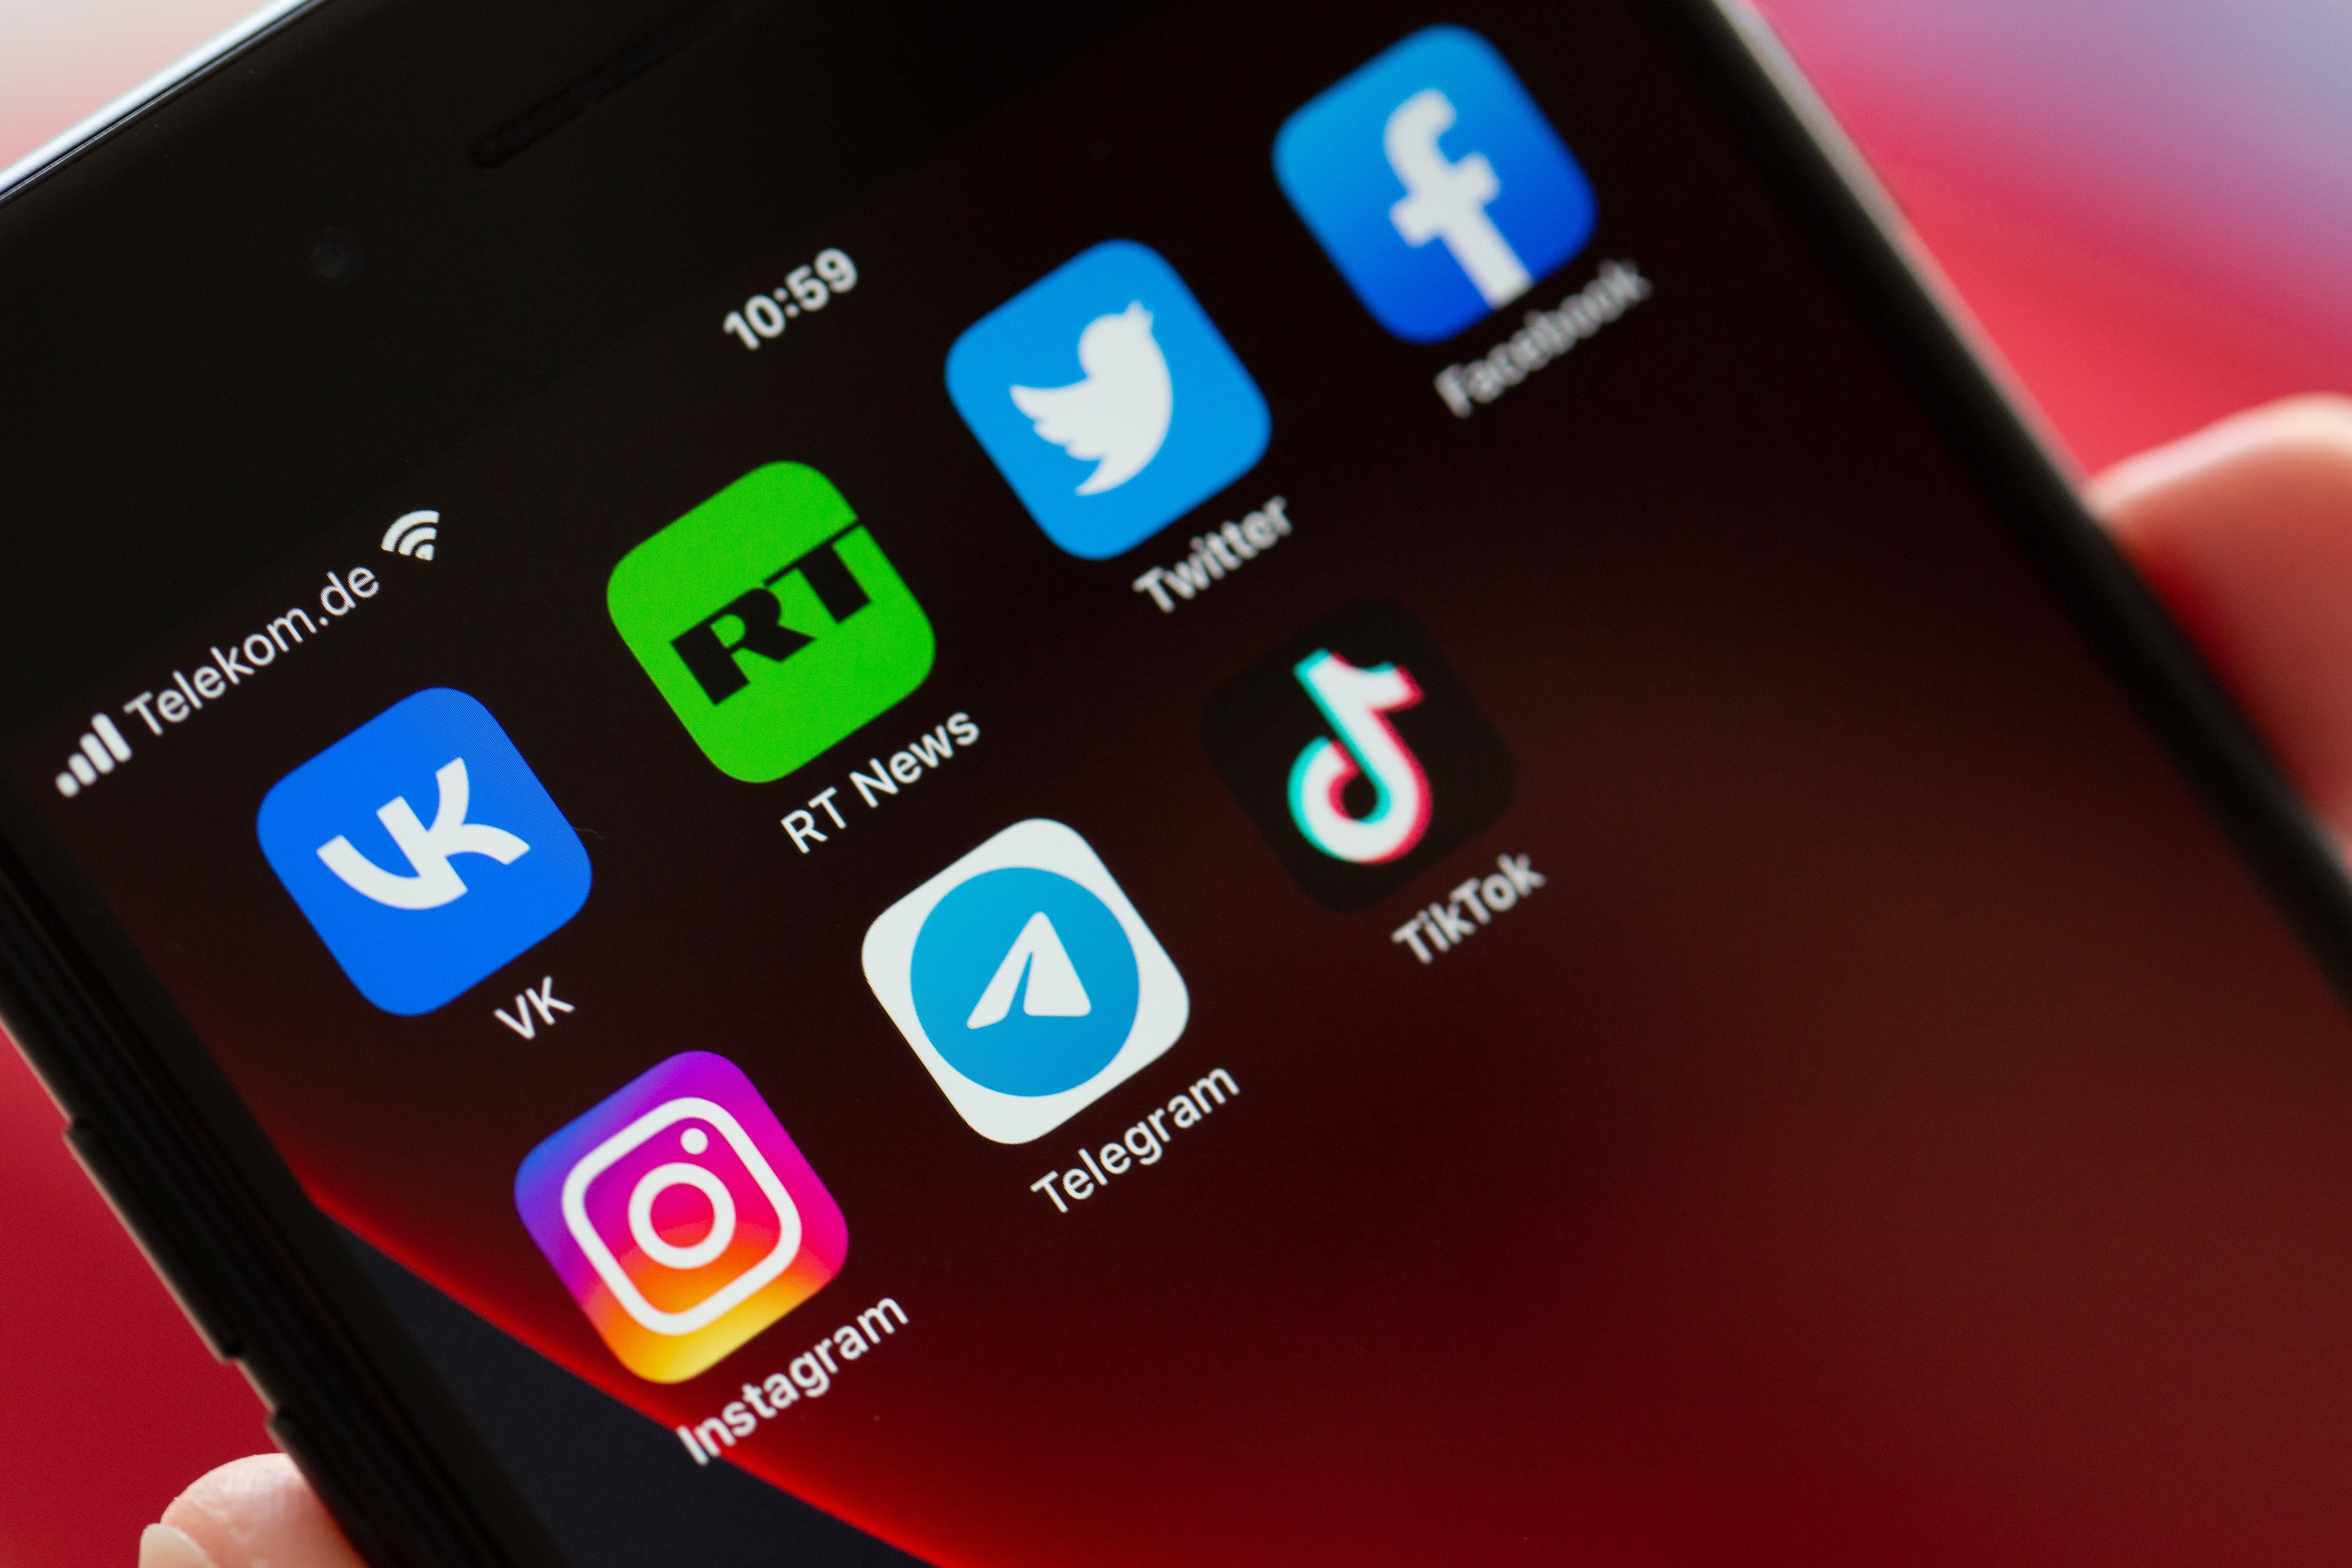 TikTok says it has removed more than 1,000 accounts affiliated with the Russian government. Photo: dpa